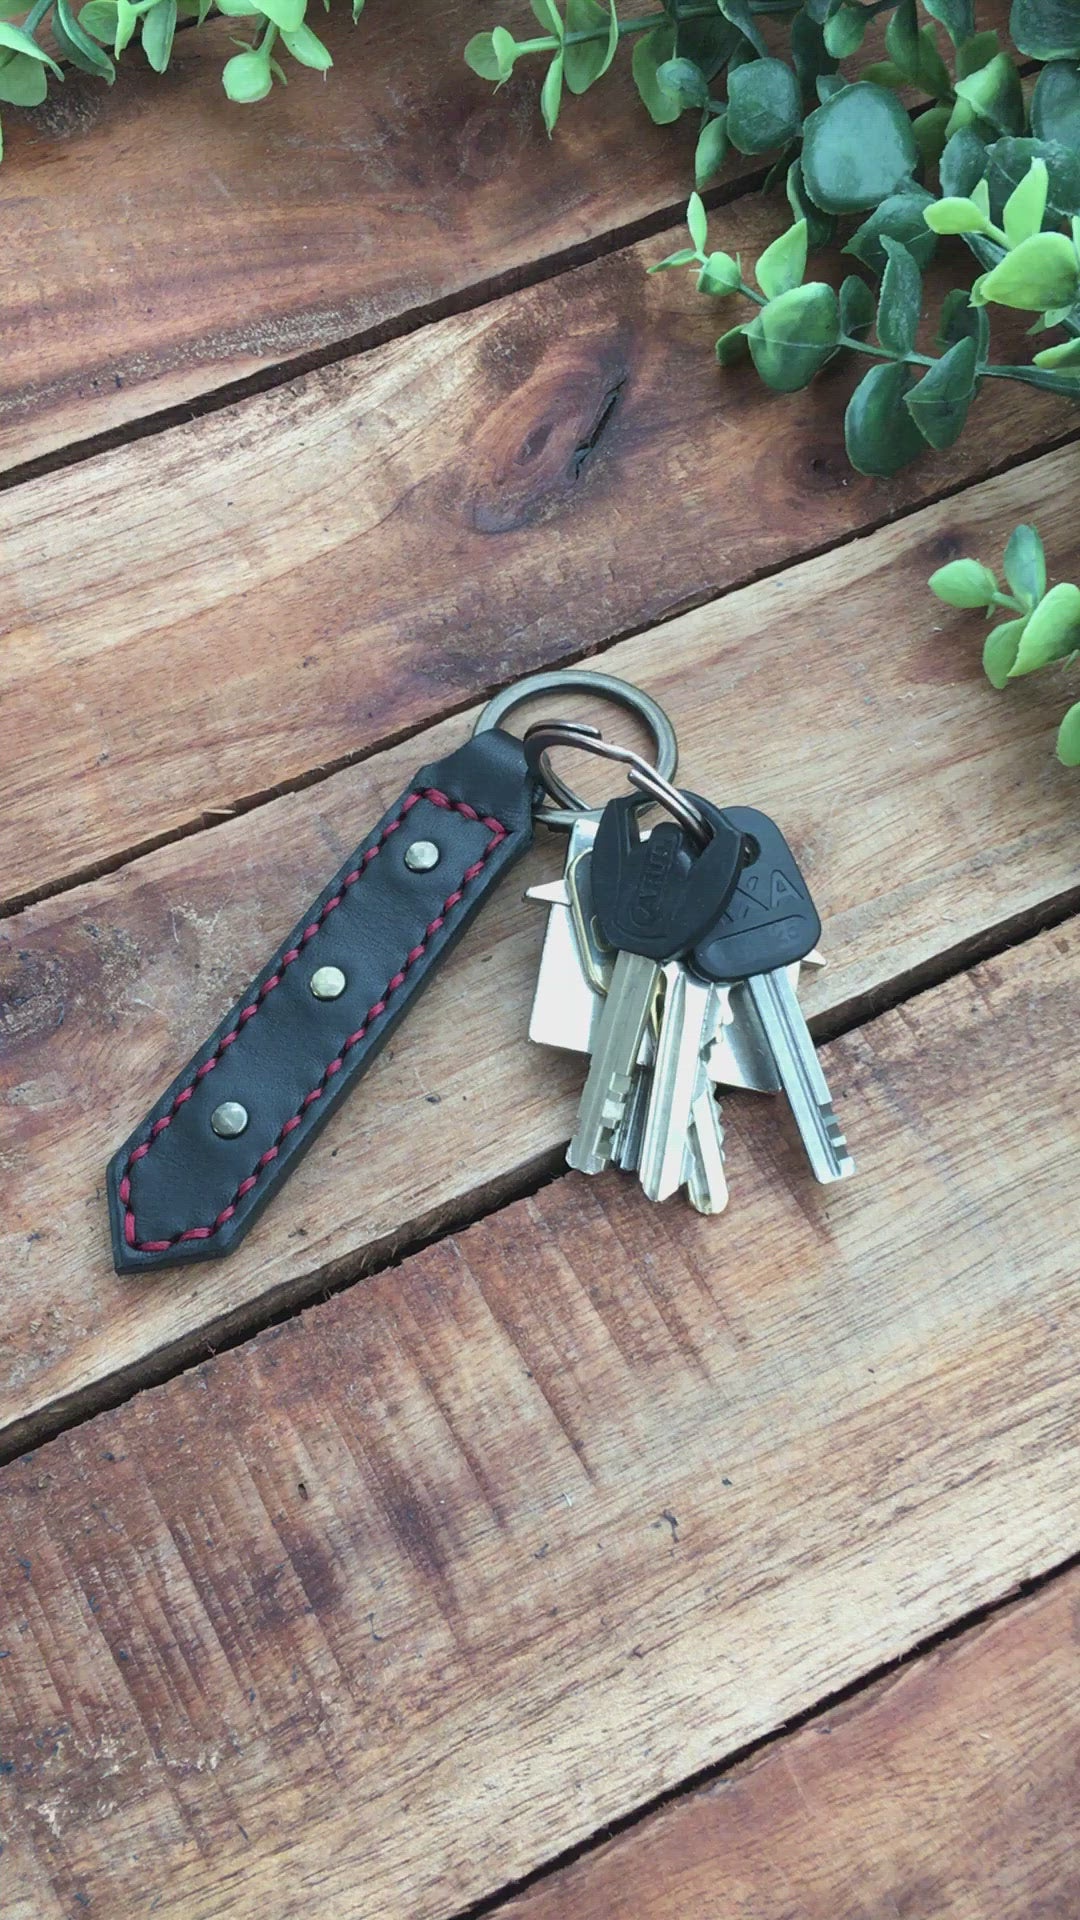 Video showing a Handmade Black Leather Studded Keychain with Red Stitching